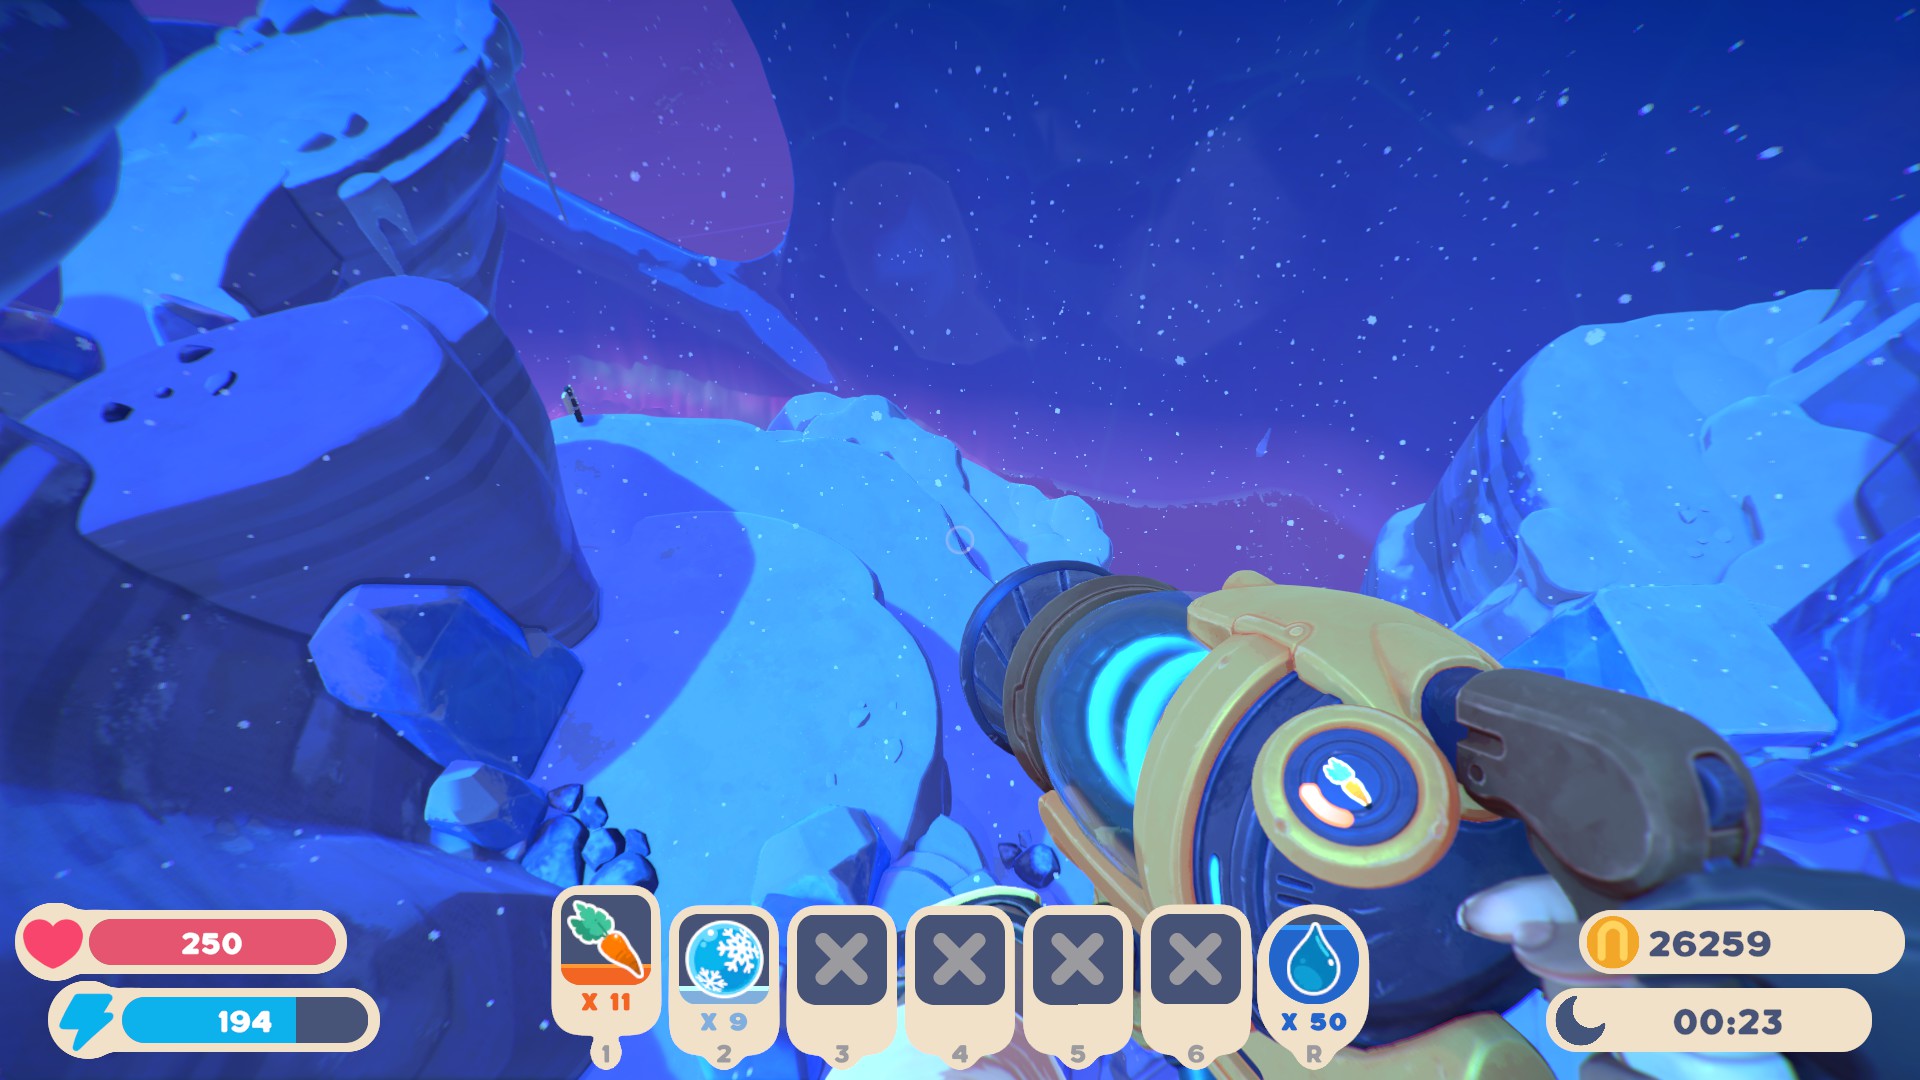 Slime Rancher 2 - Capsule Locations for Powderfall Bluffs - Pods 1 - 6 (Exterior I) - F4E9A5D